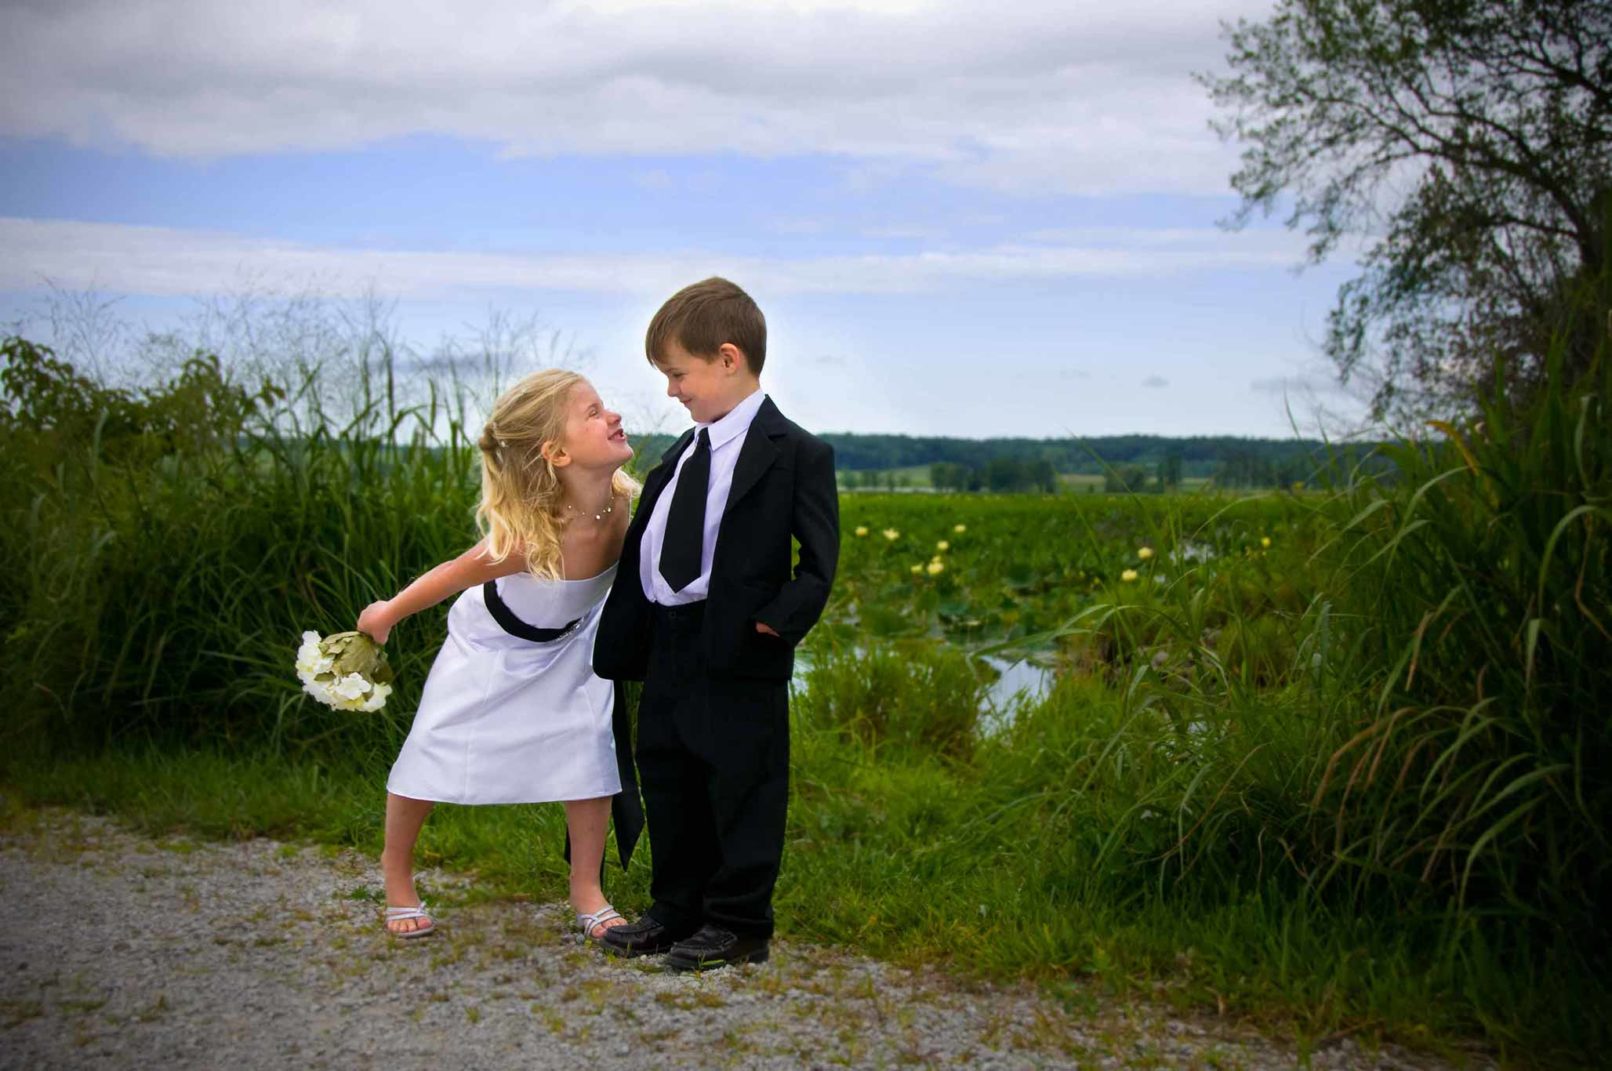 young boy and girl wearing formalwear looking at eachother.